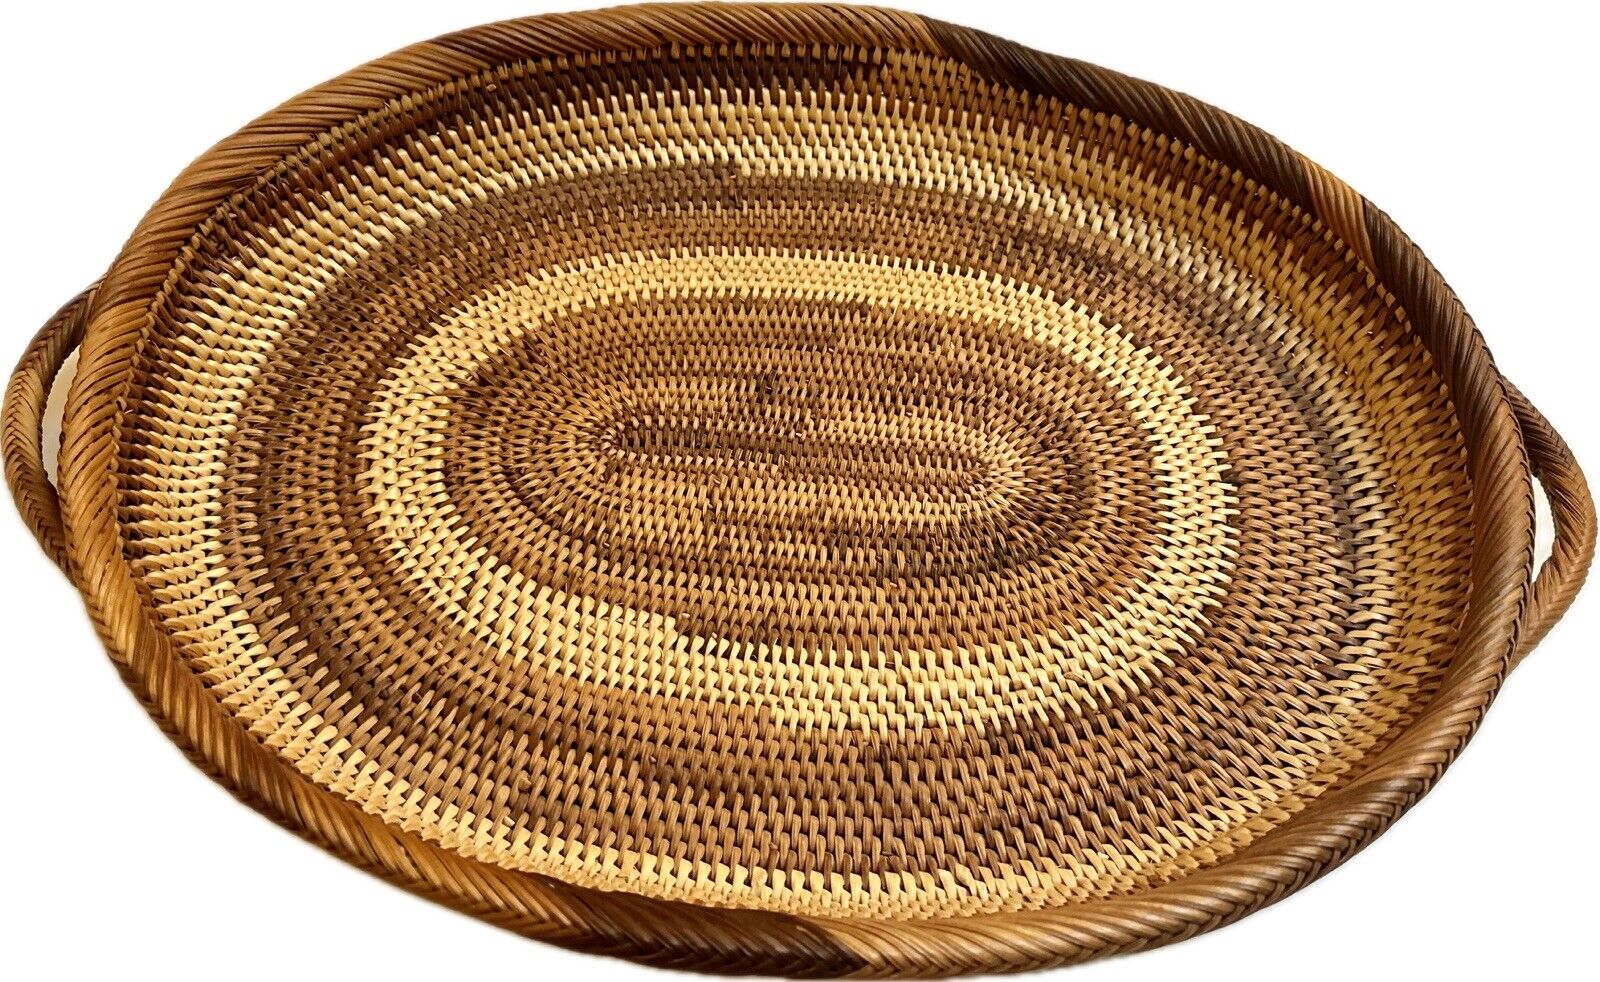 Large Oval Woven Basket Tray With Handles